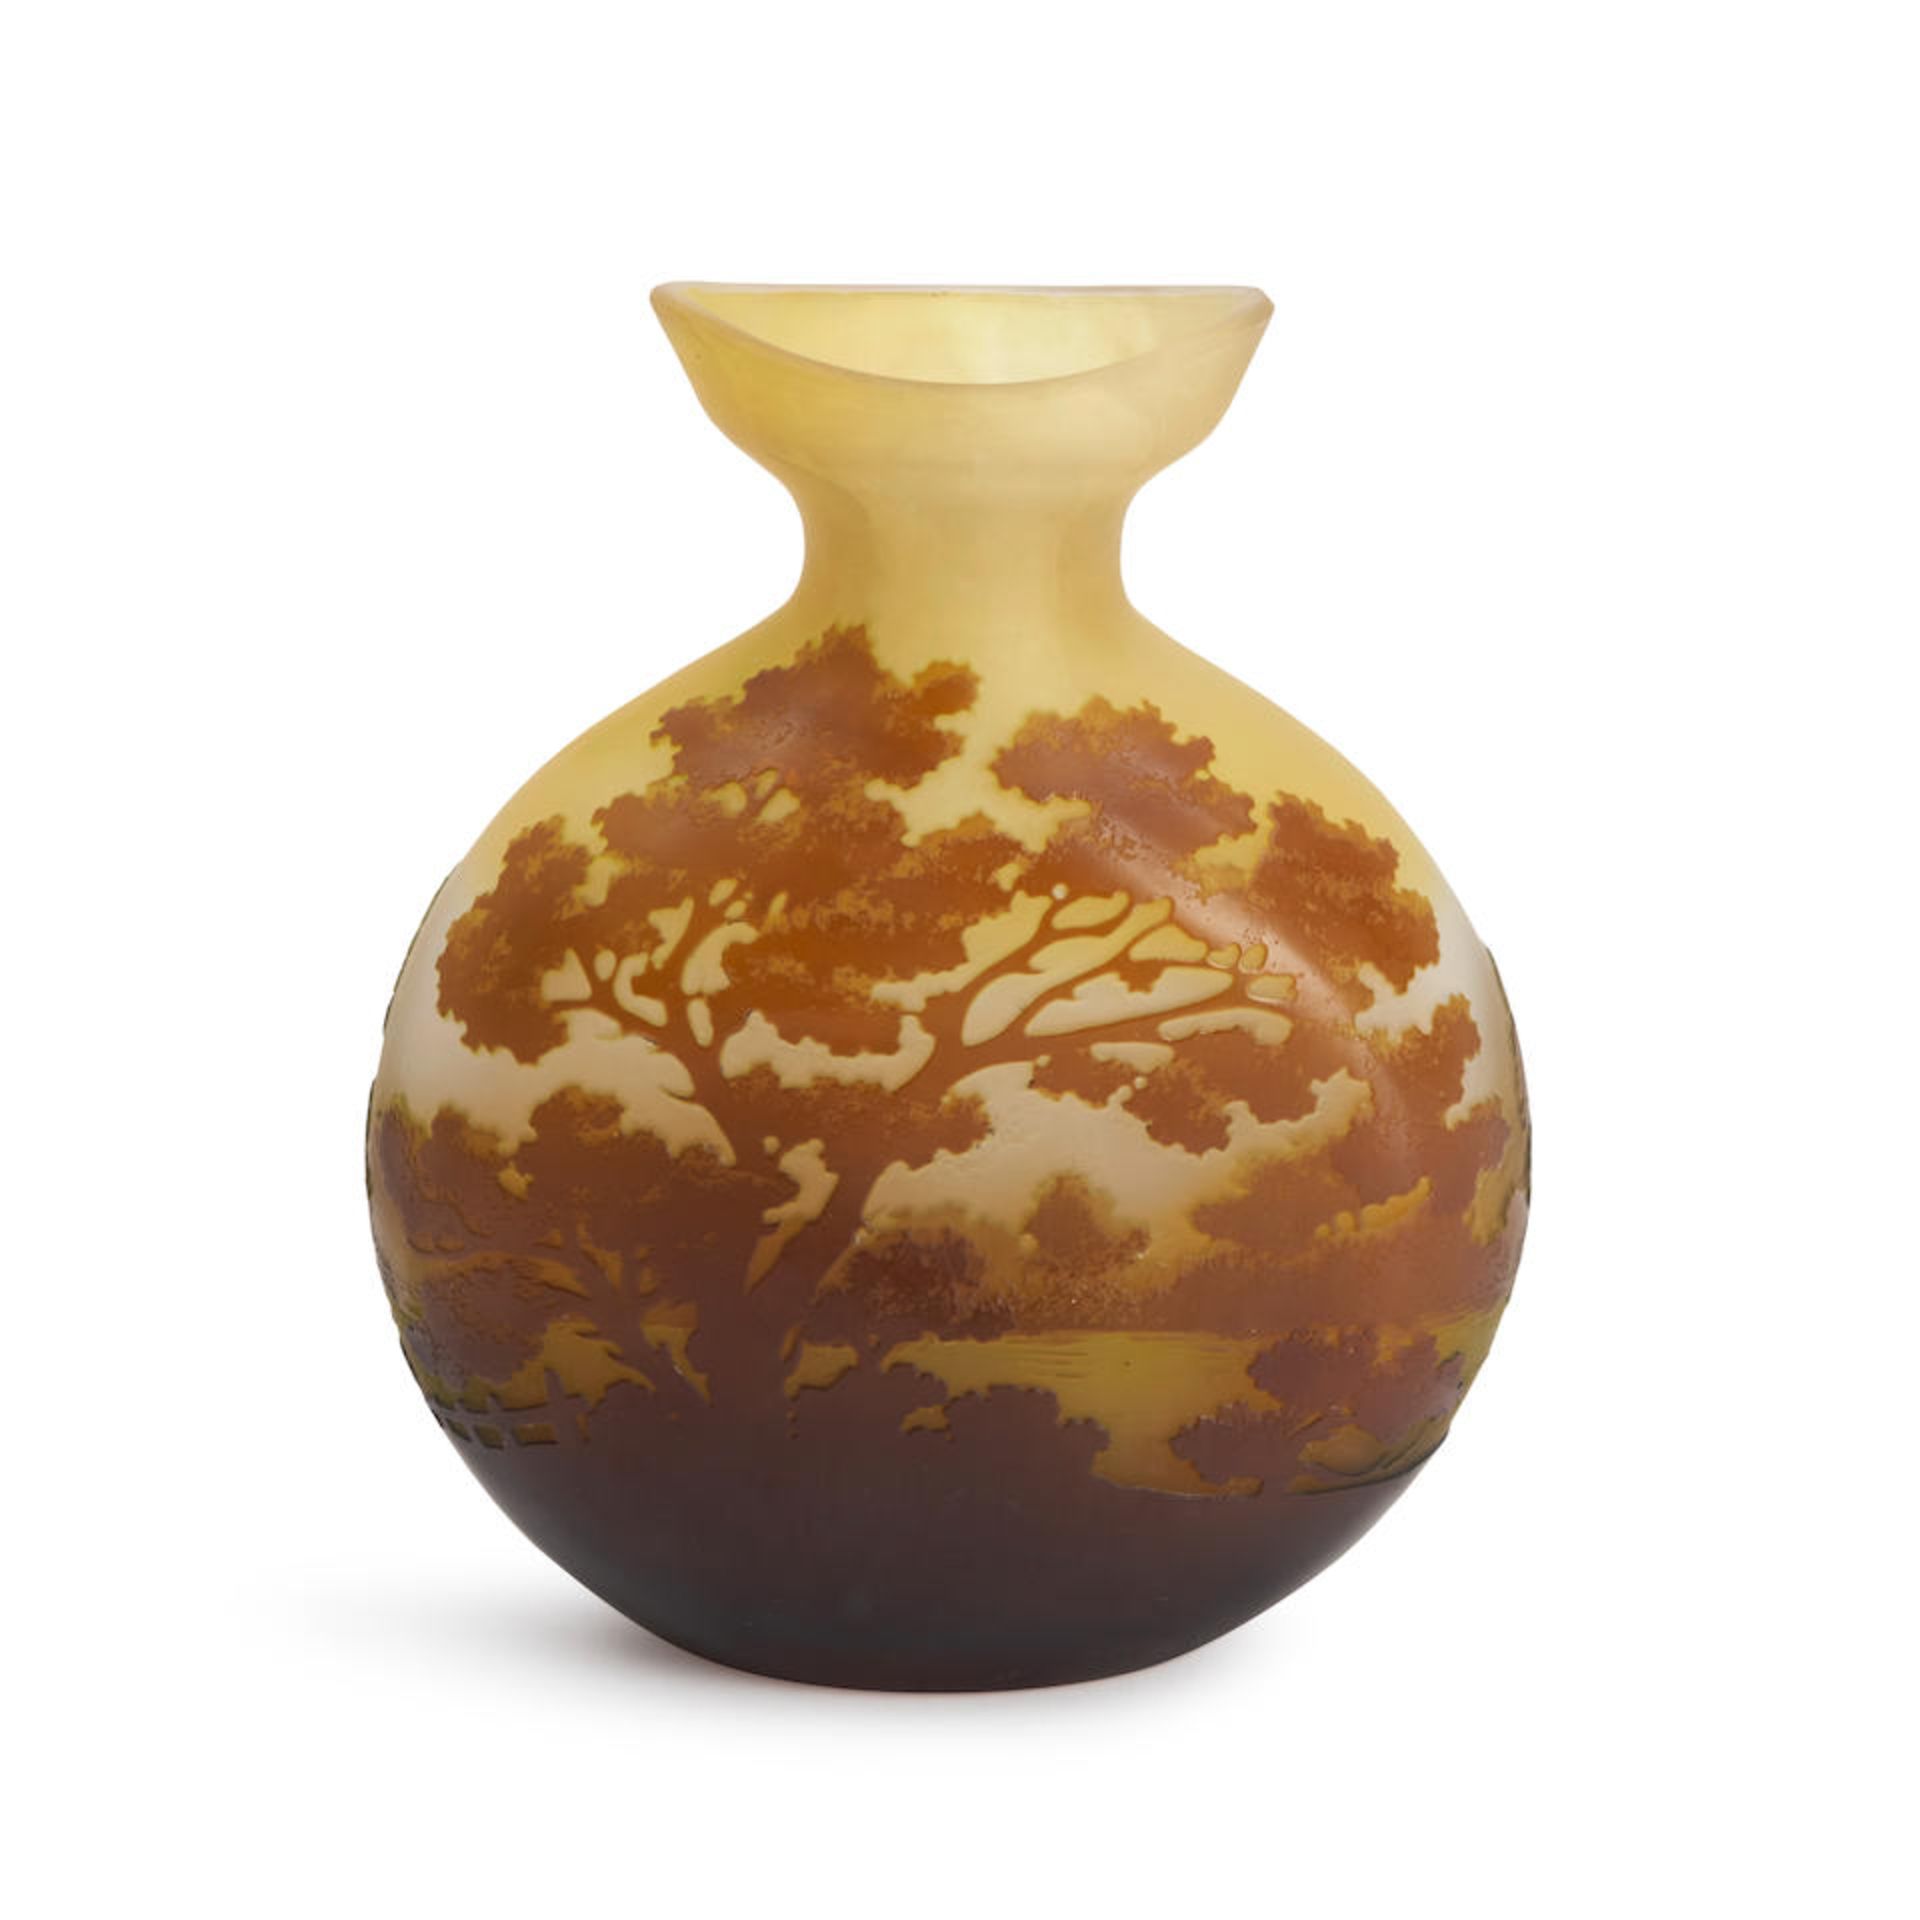 GALLE CAMEO GLASS LANDSCAPE VASE, France, early 20th century, cameo mark 'Galle,' ht. 5 1/2 in.